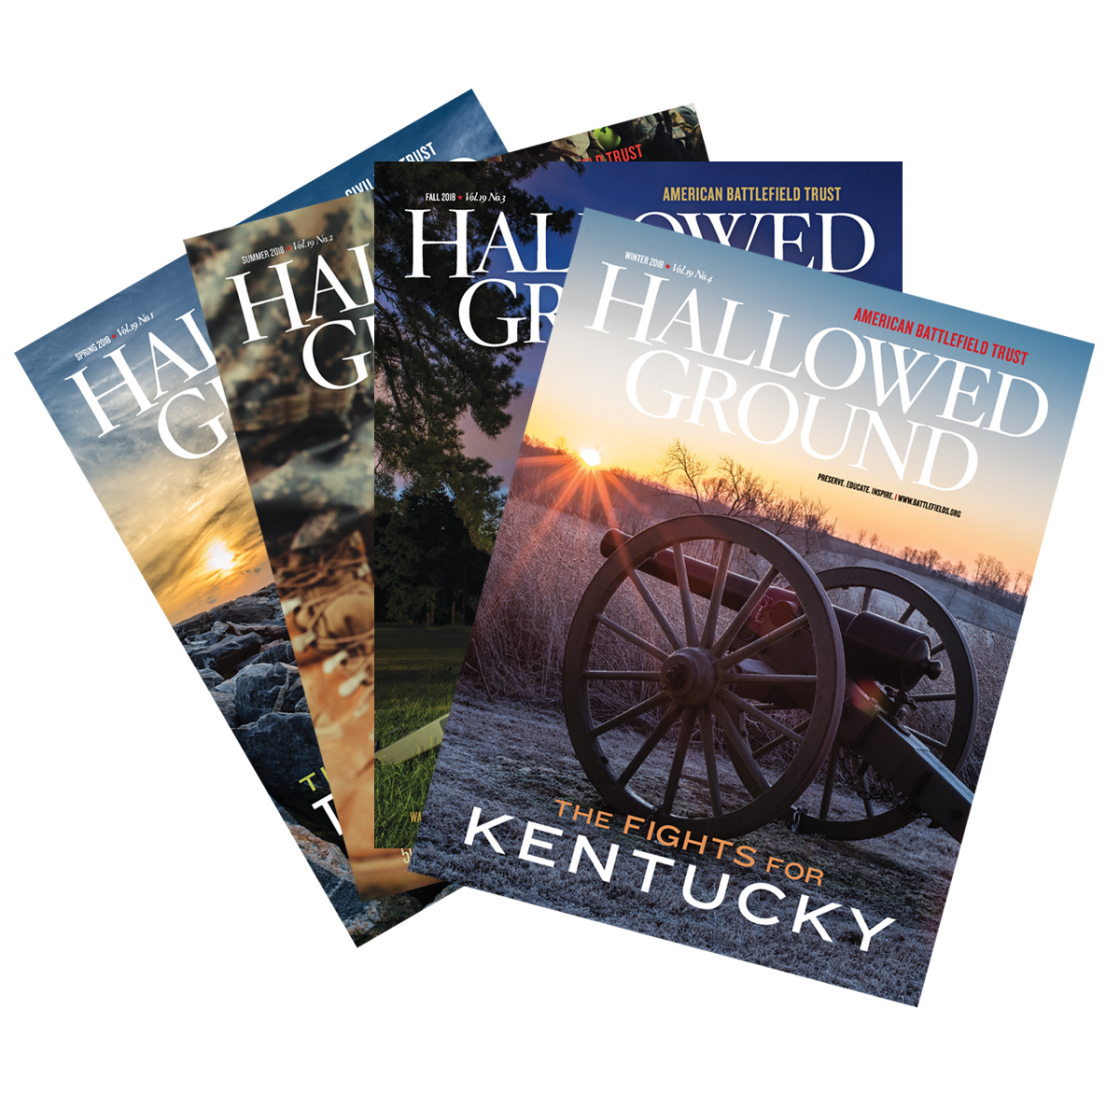 Photo of several issues of Hallowed Ground Magazine